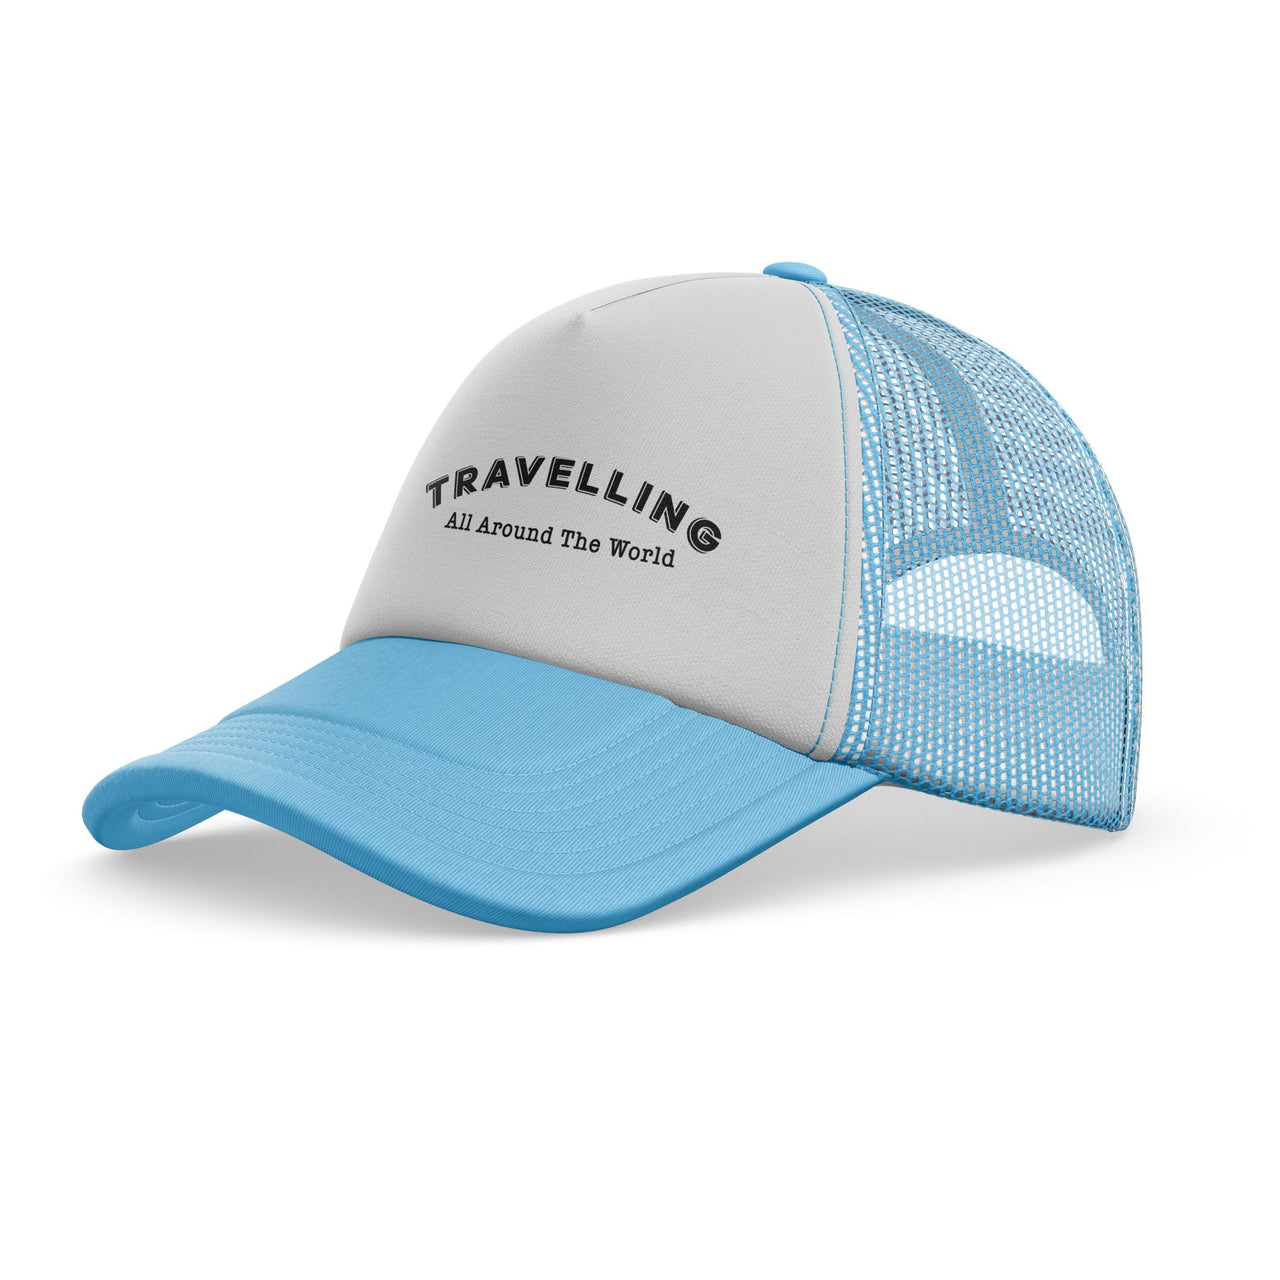 Travelling All Around The World Designed Trucker Caps & Hats